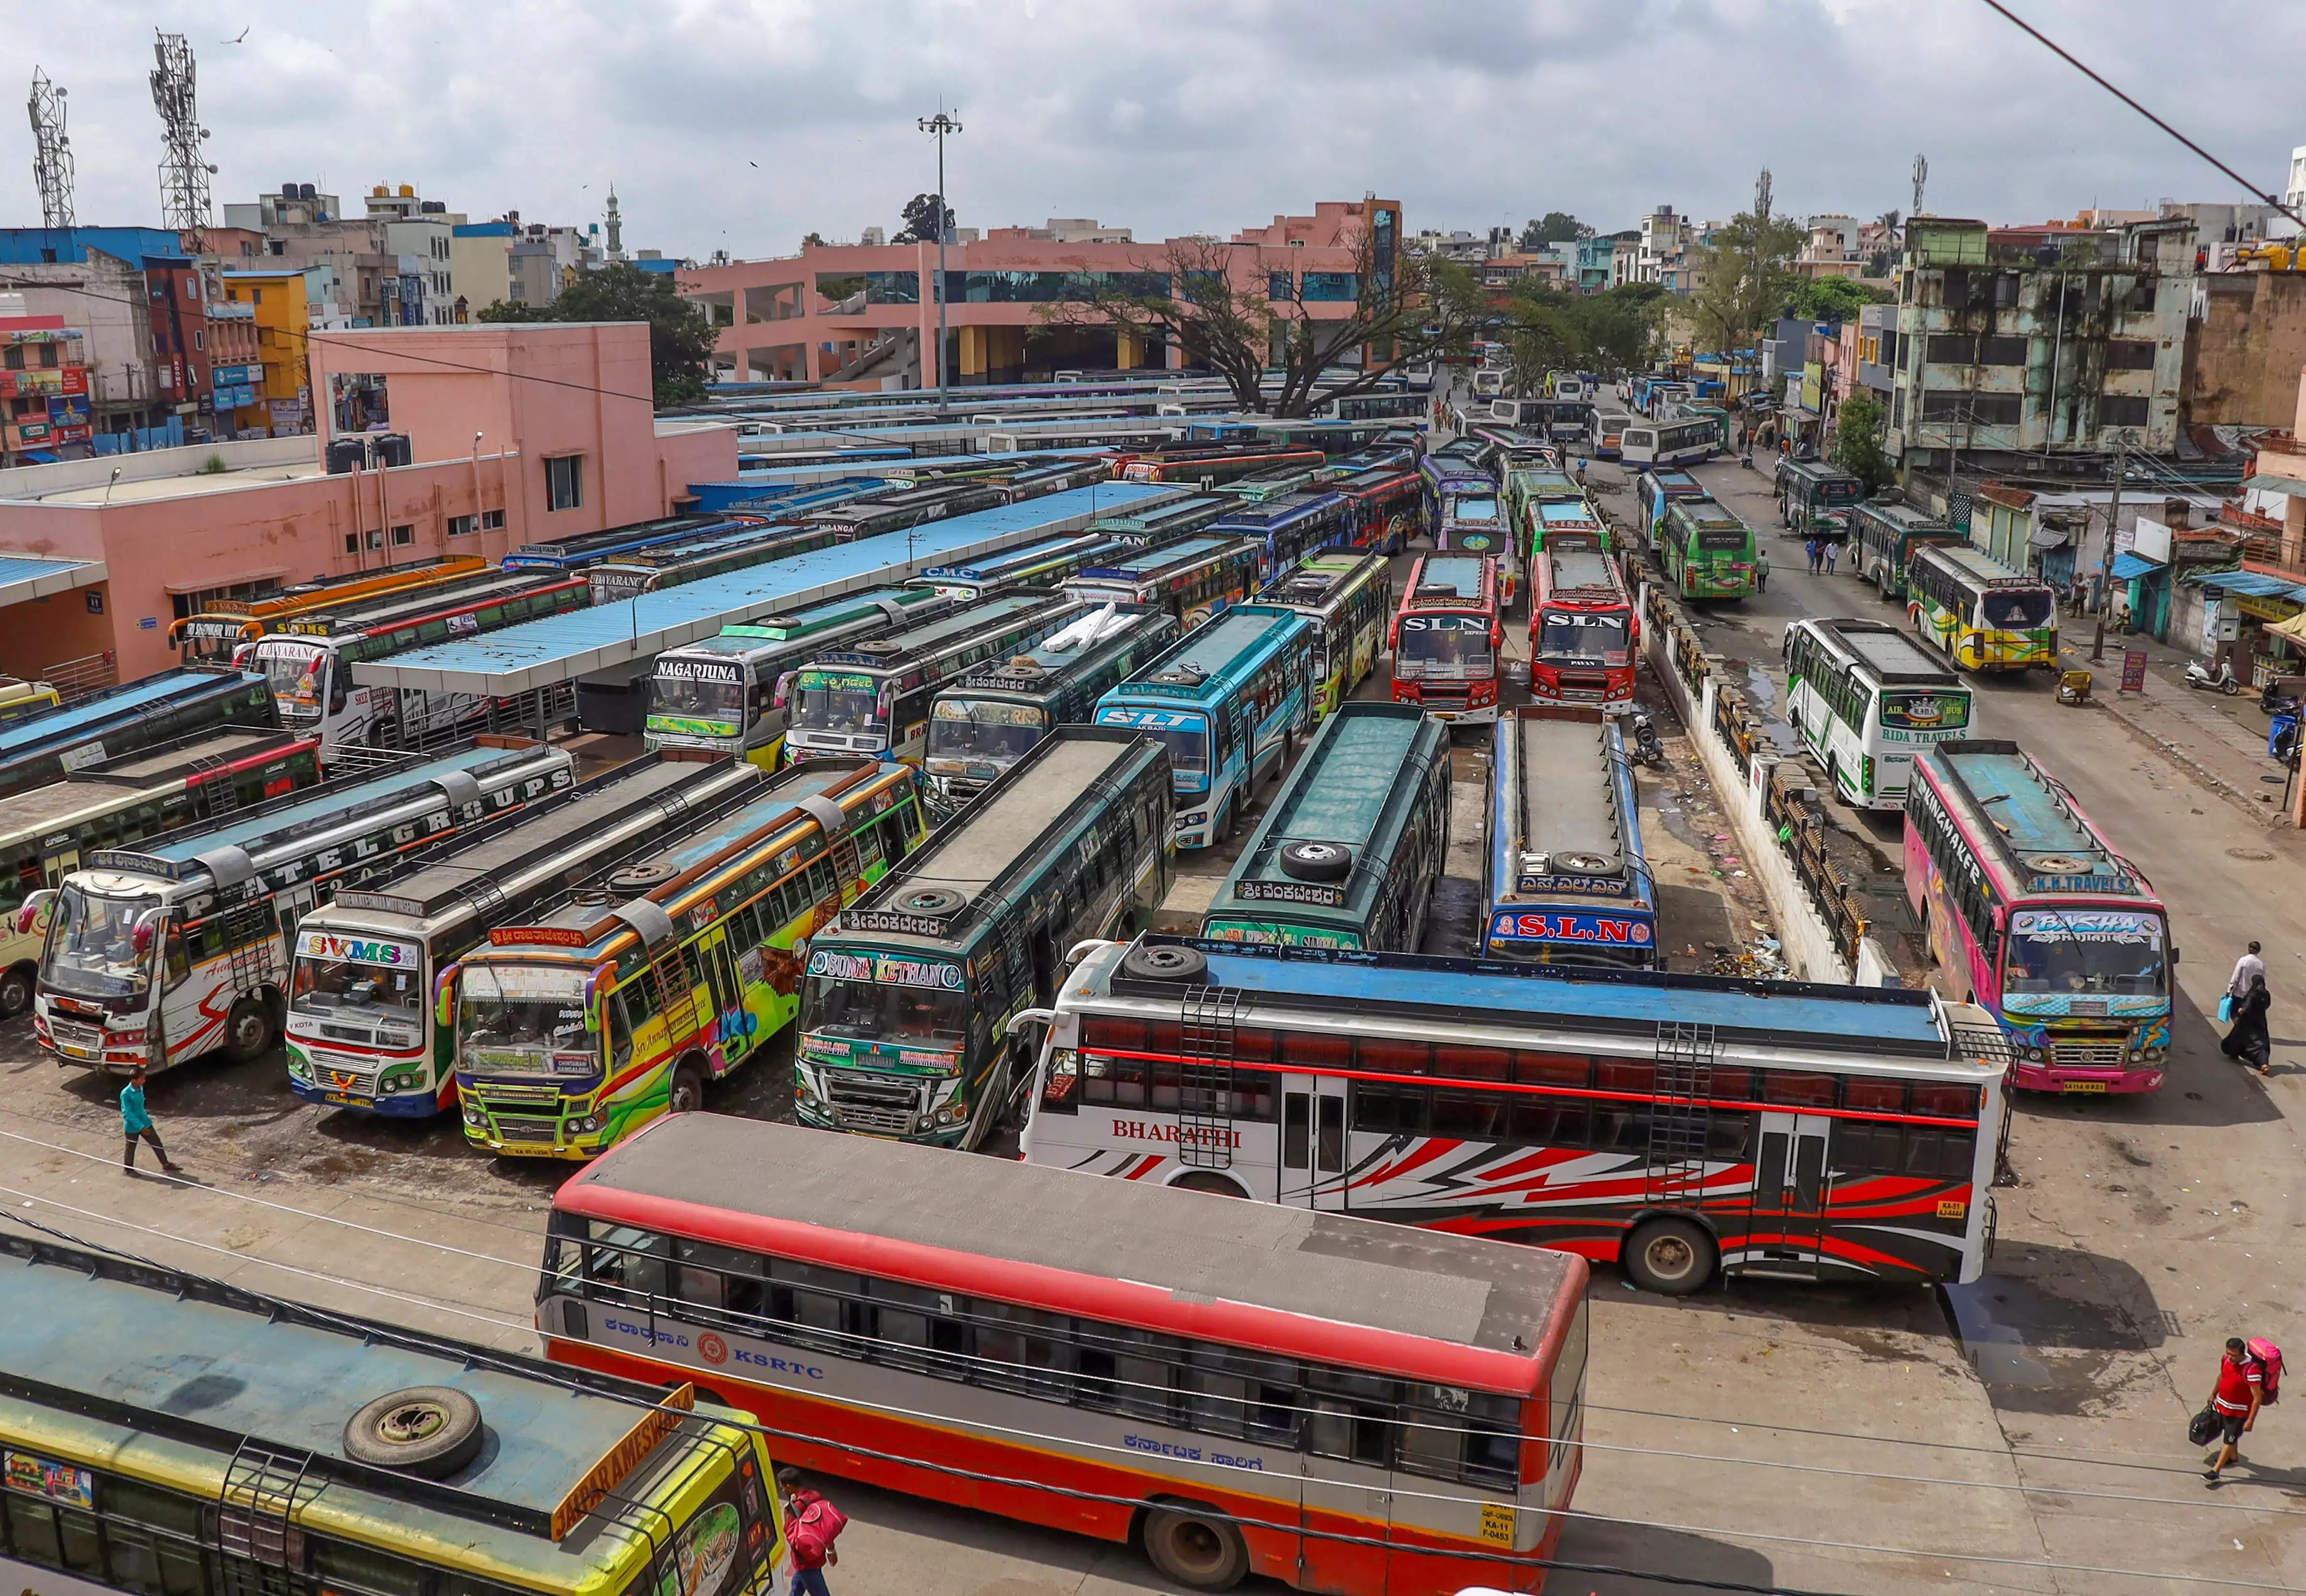 Strike for better pay: Buses to be off roads in Tamil Nadu from Jan 9